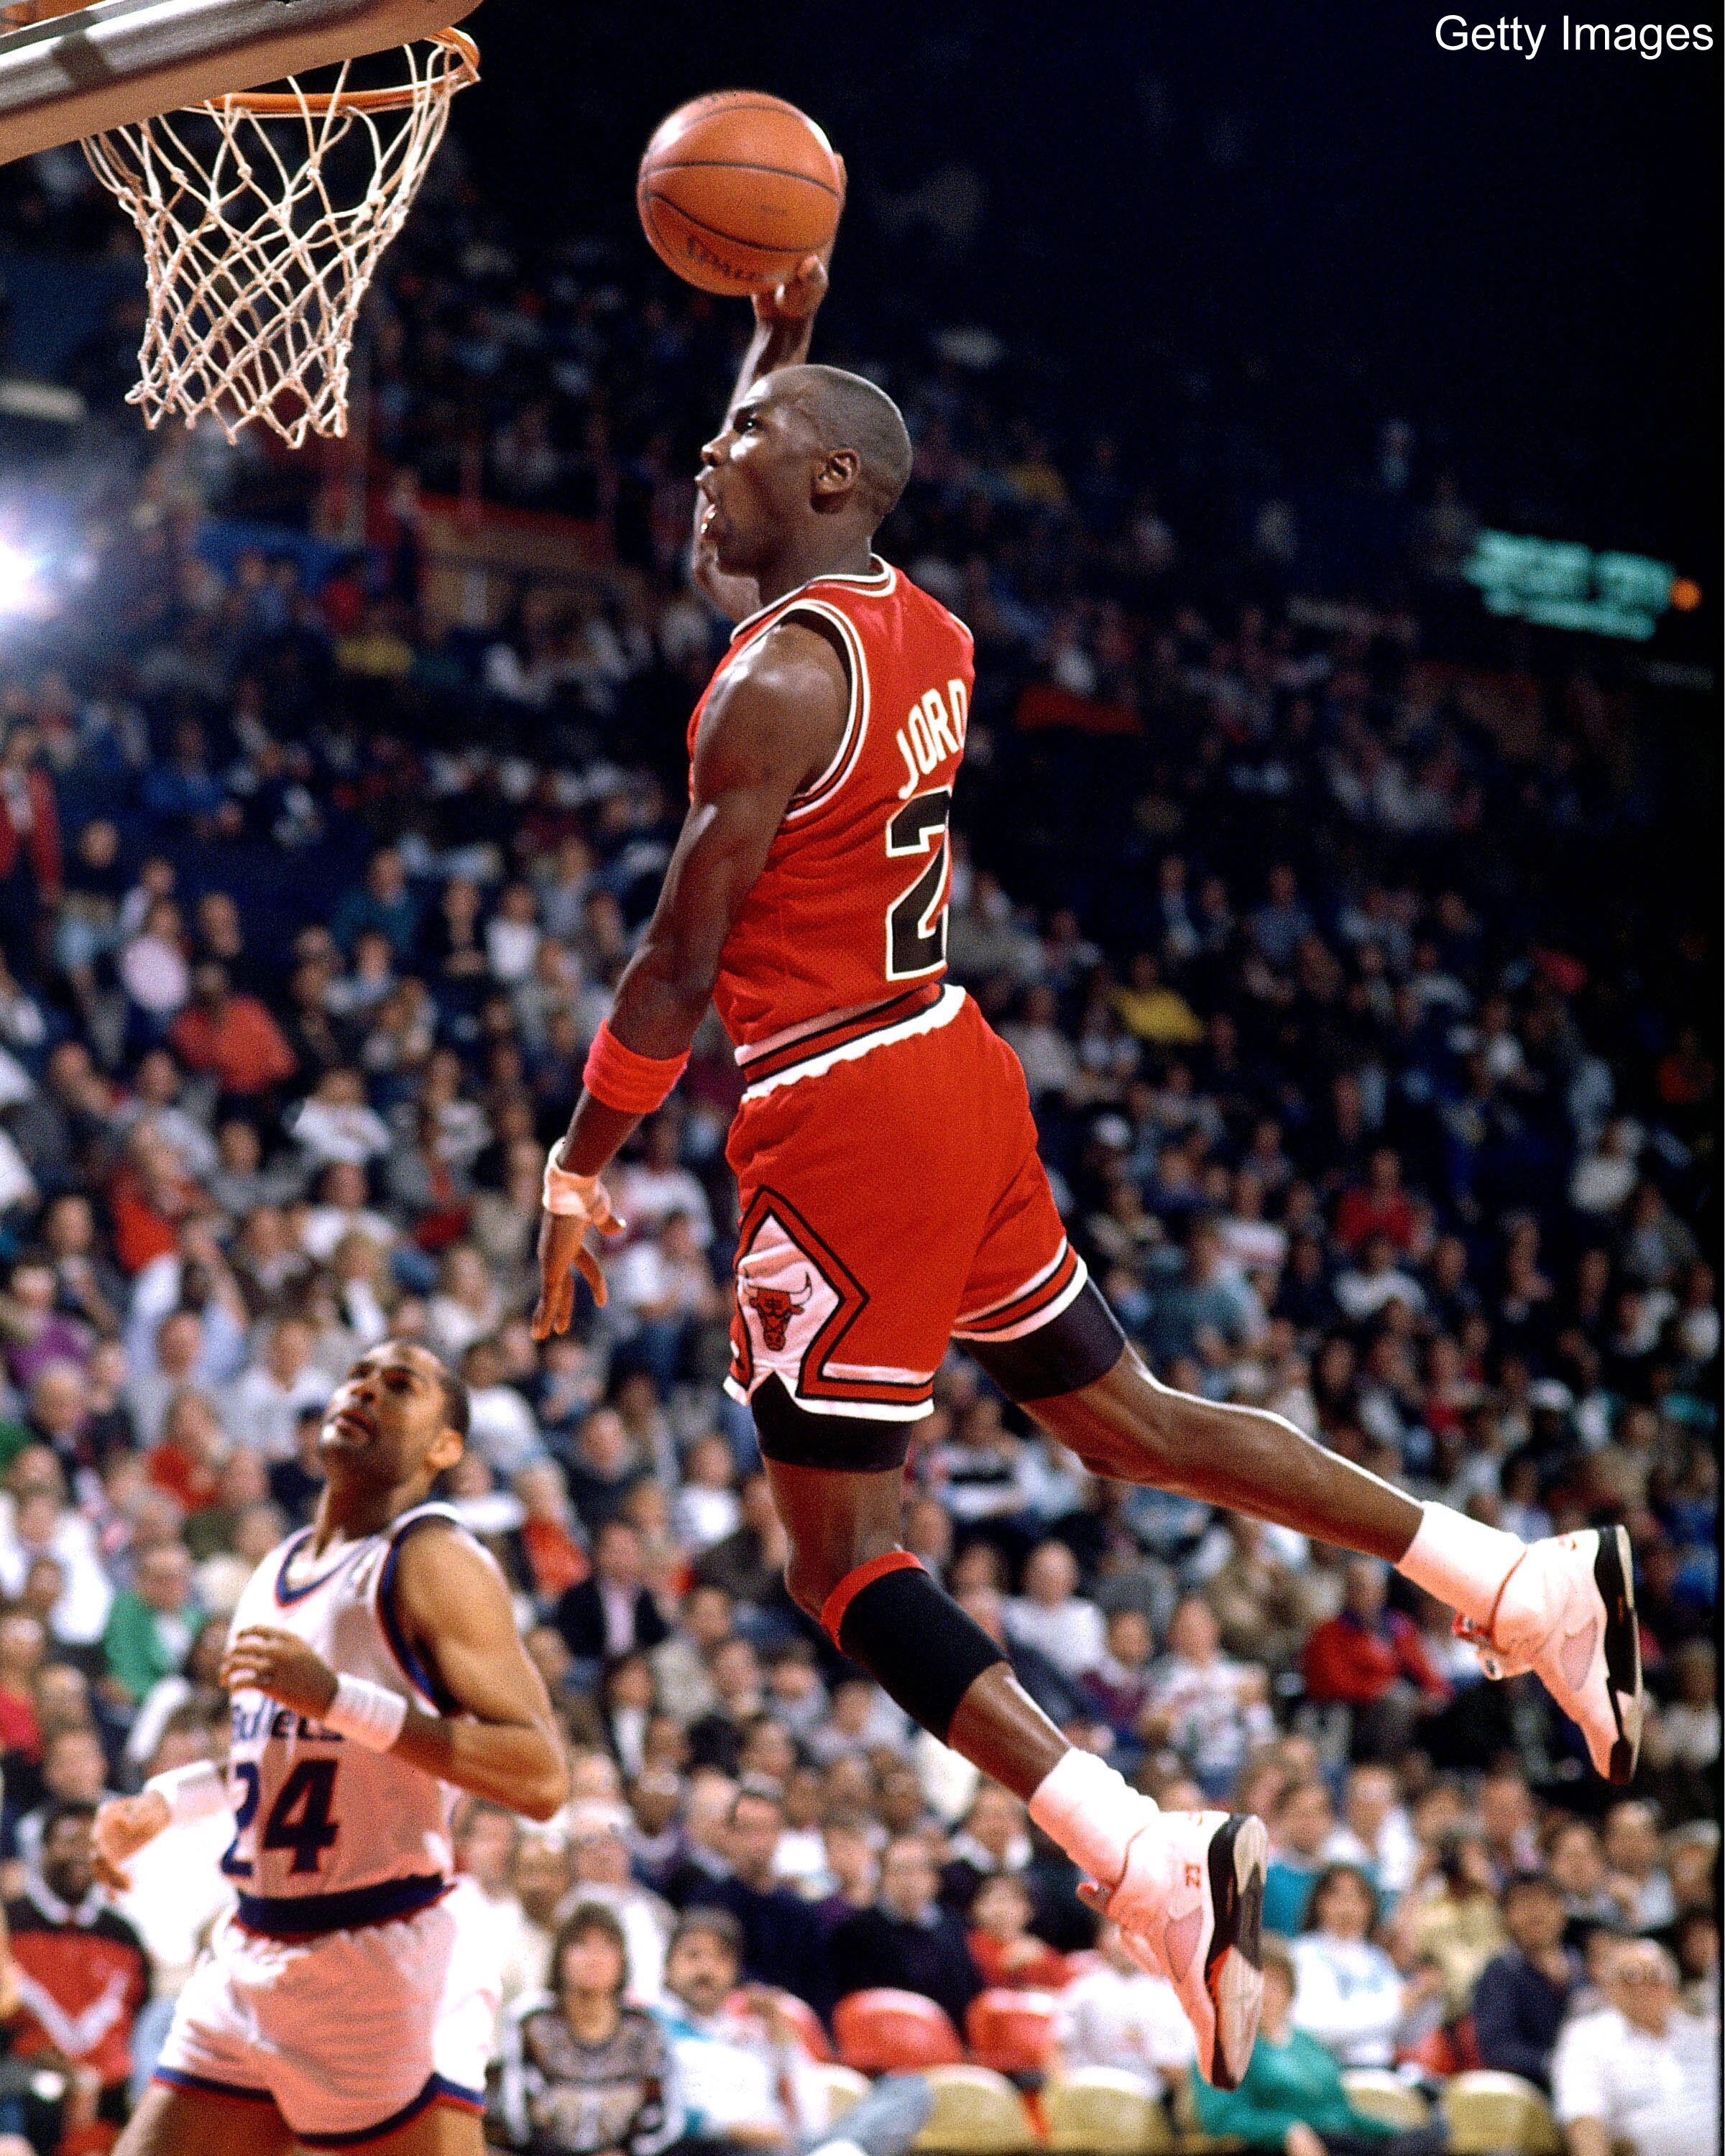 On This Day In 1993: Michael Jordan Scored His 20,000th Point | AmericanSportsHistory.com